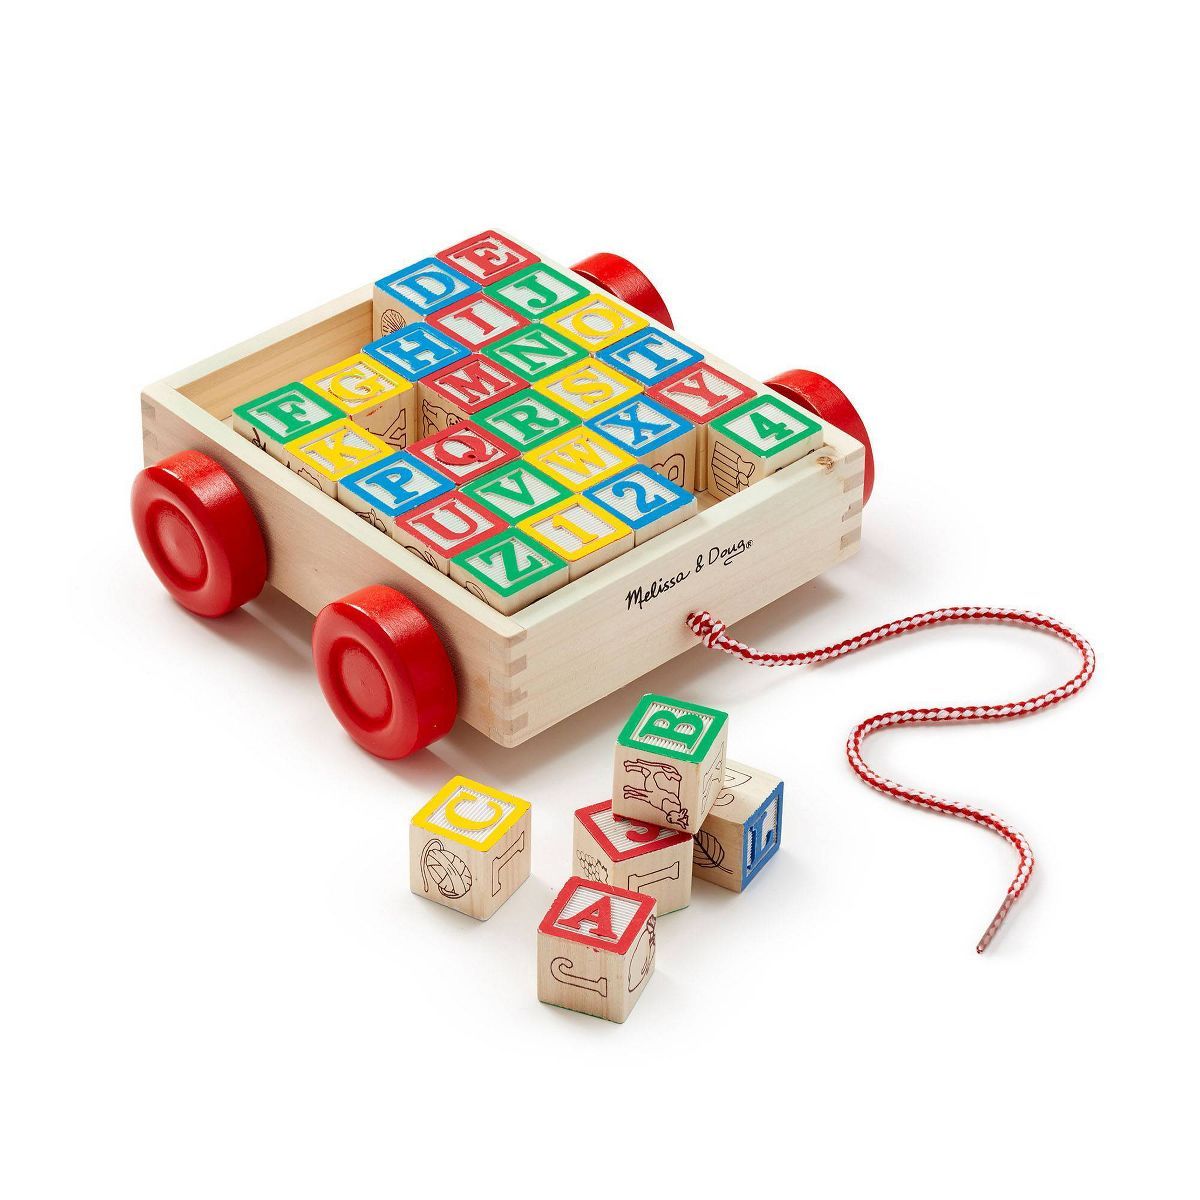 Melissa & Doug Classic ABC Wooden Block Cart Educational Toy With 30 Solid Wood Blocks | Target